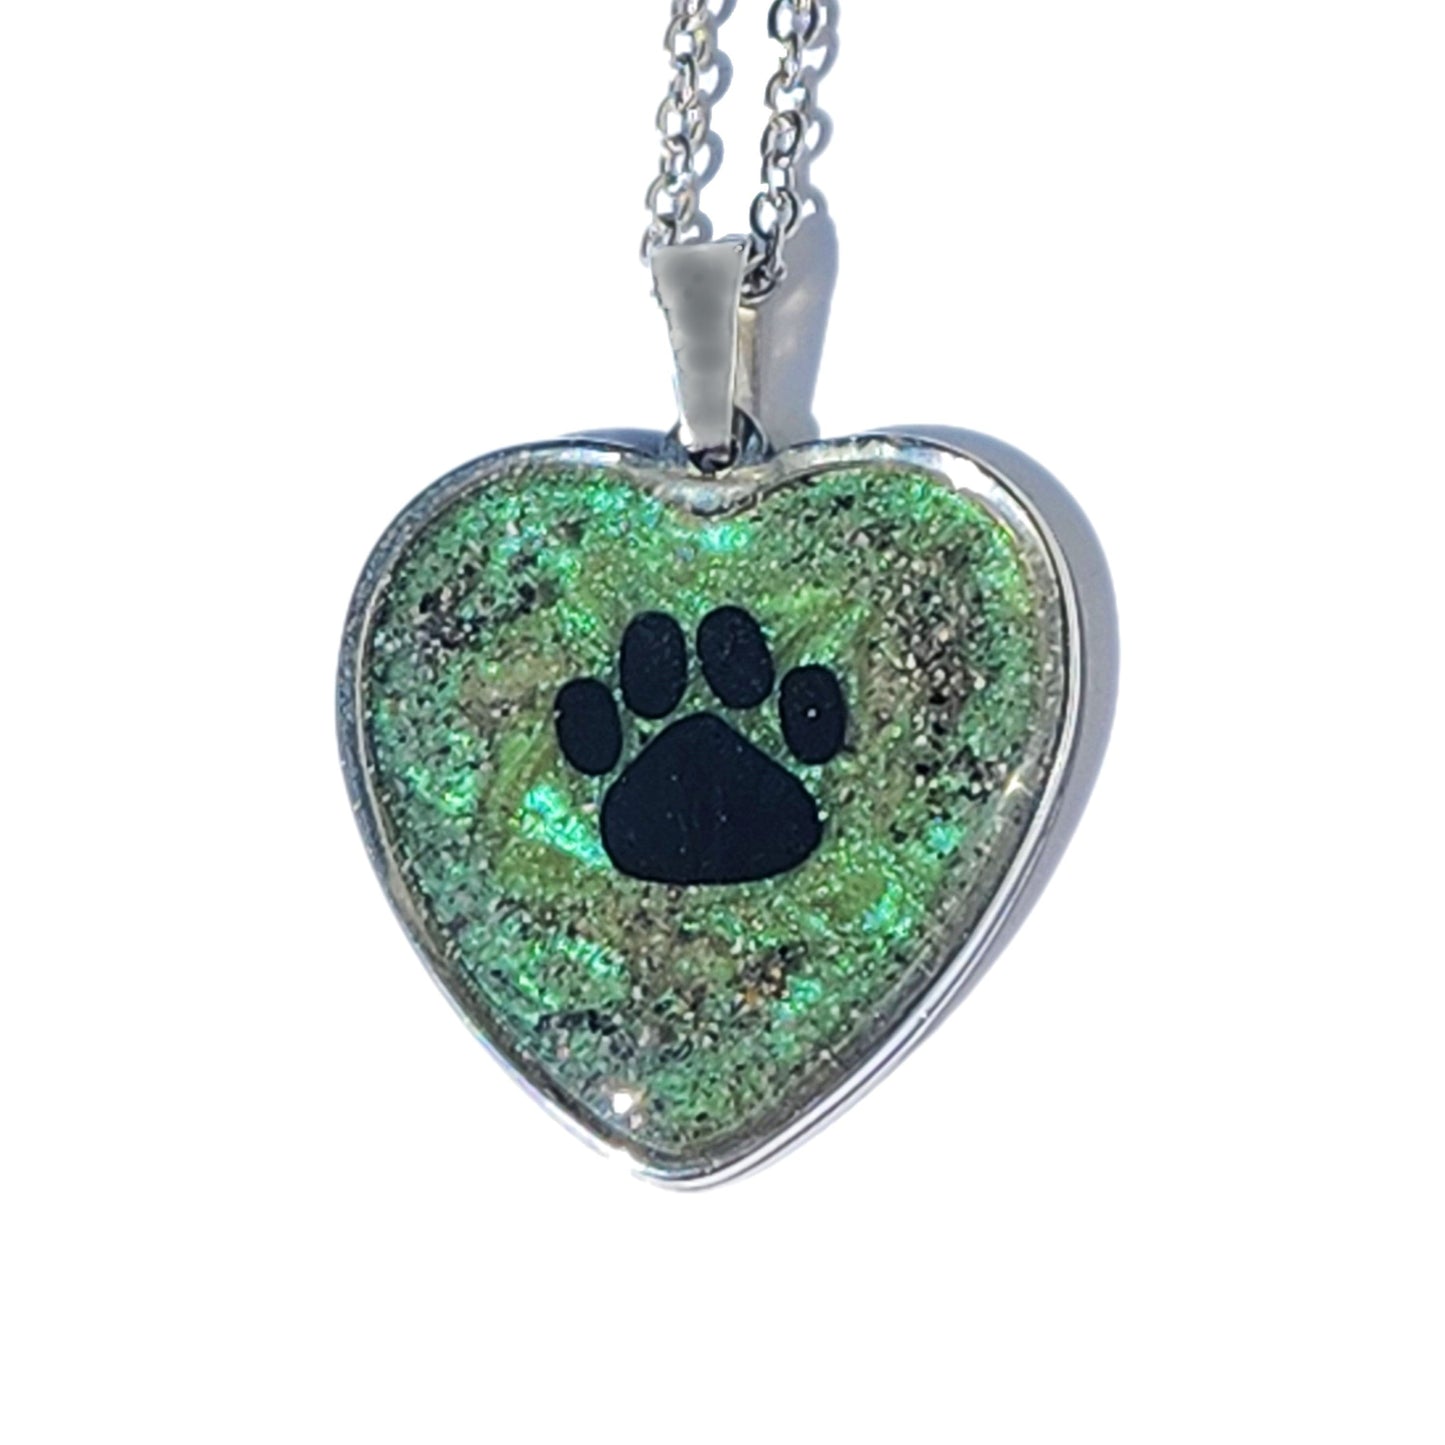 The Paw Print cremation pendant-Cremation Pendant-DragonFire Glass-DragonFire Glass Cremation Jewelry